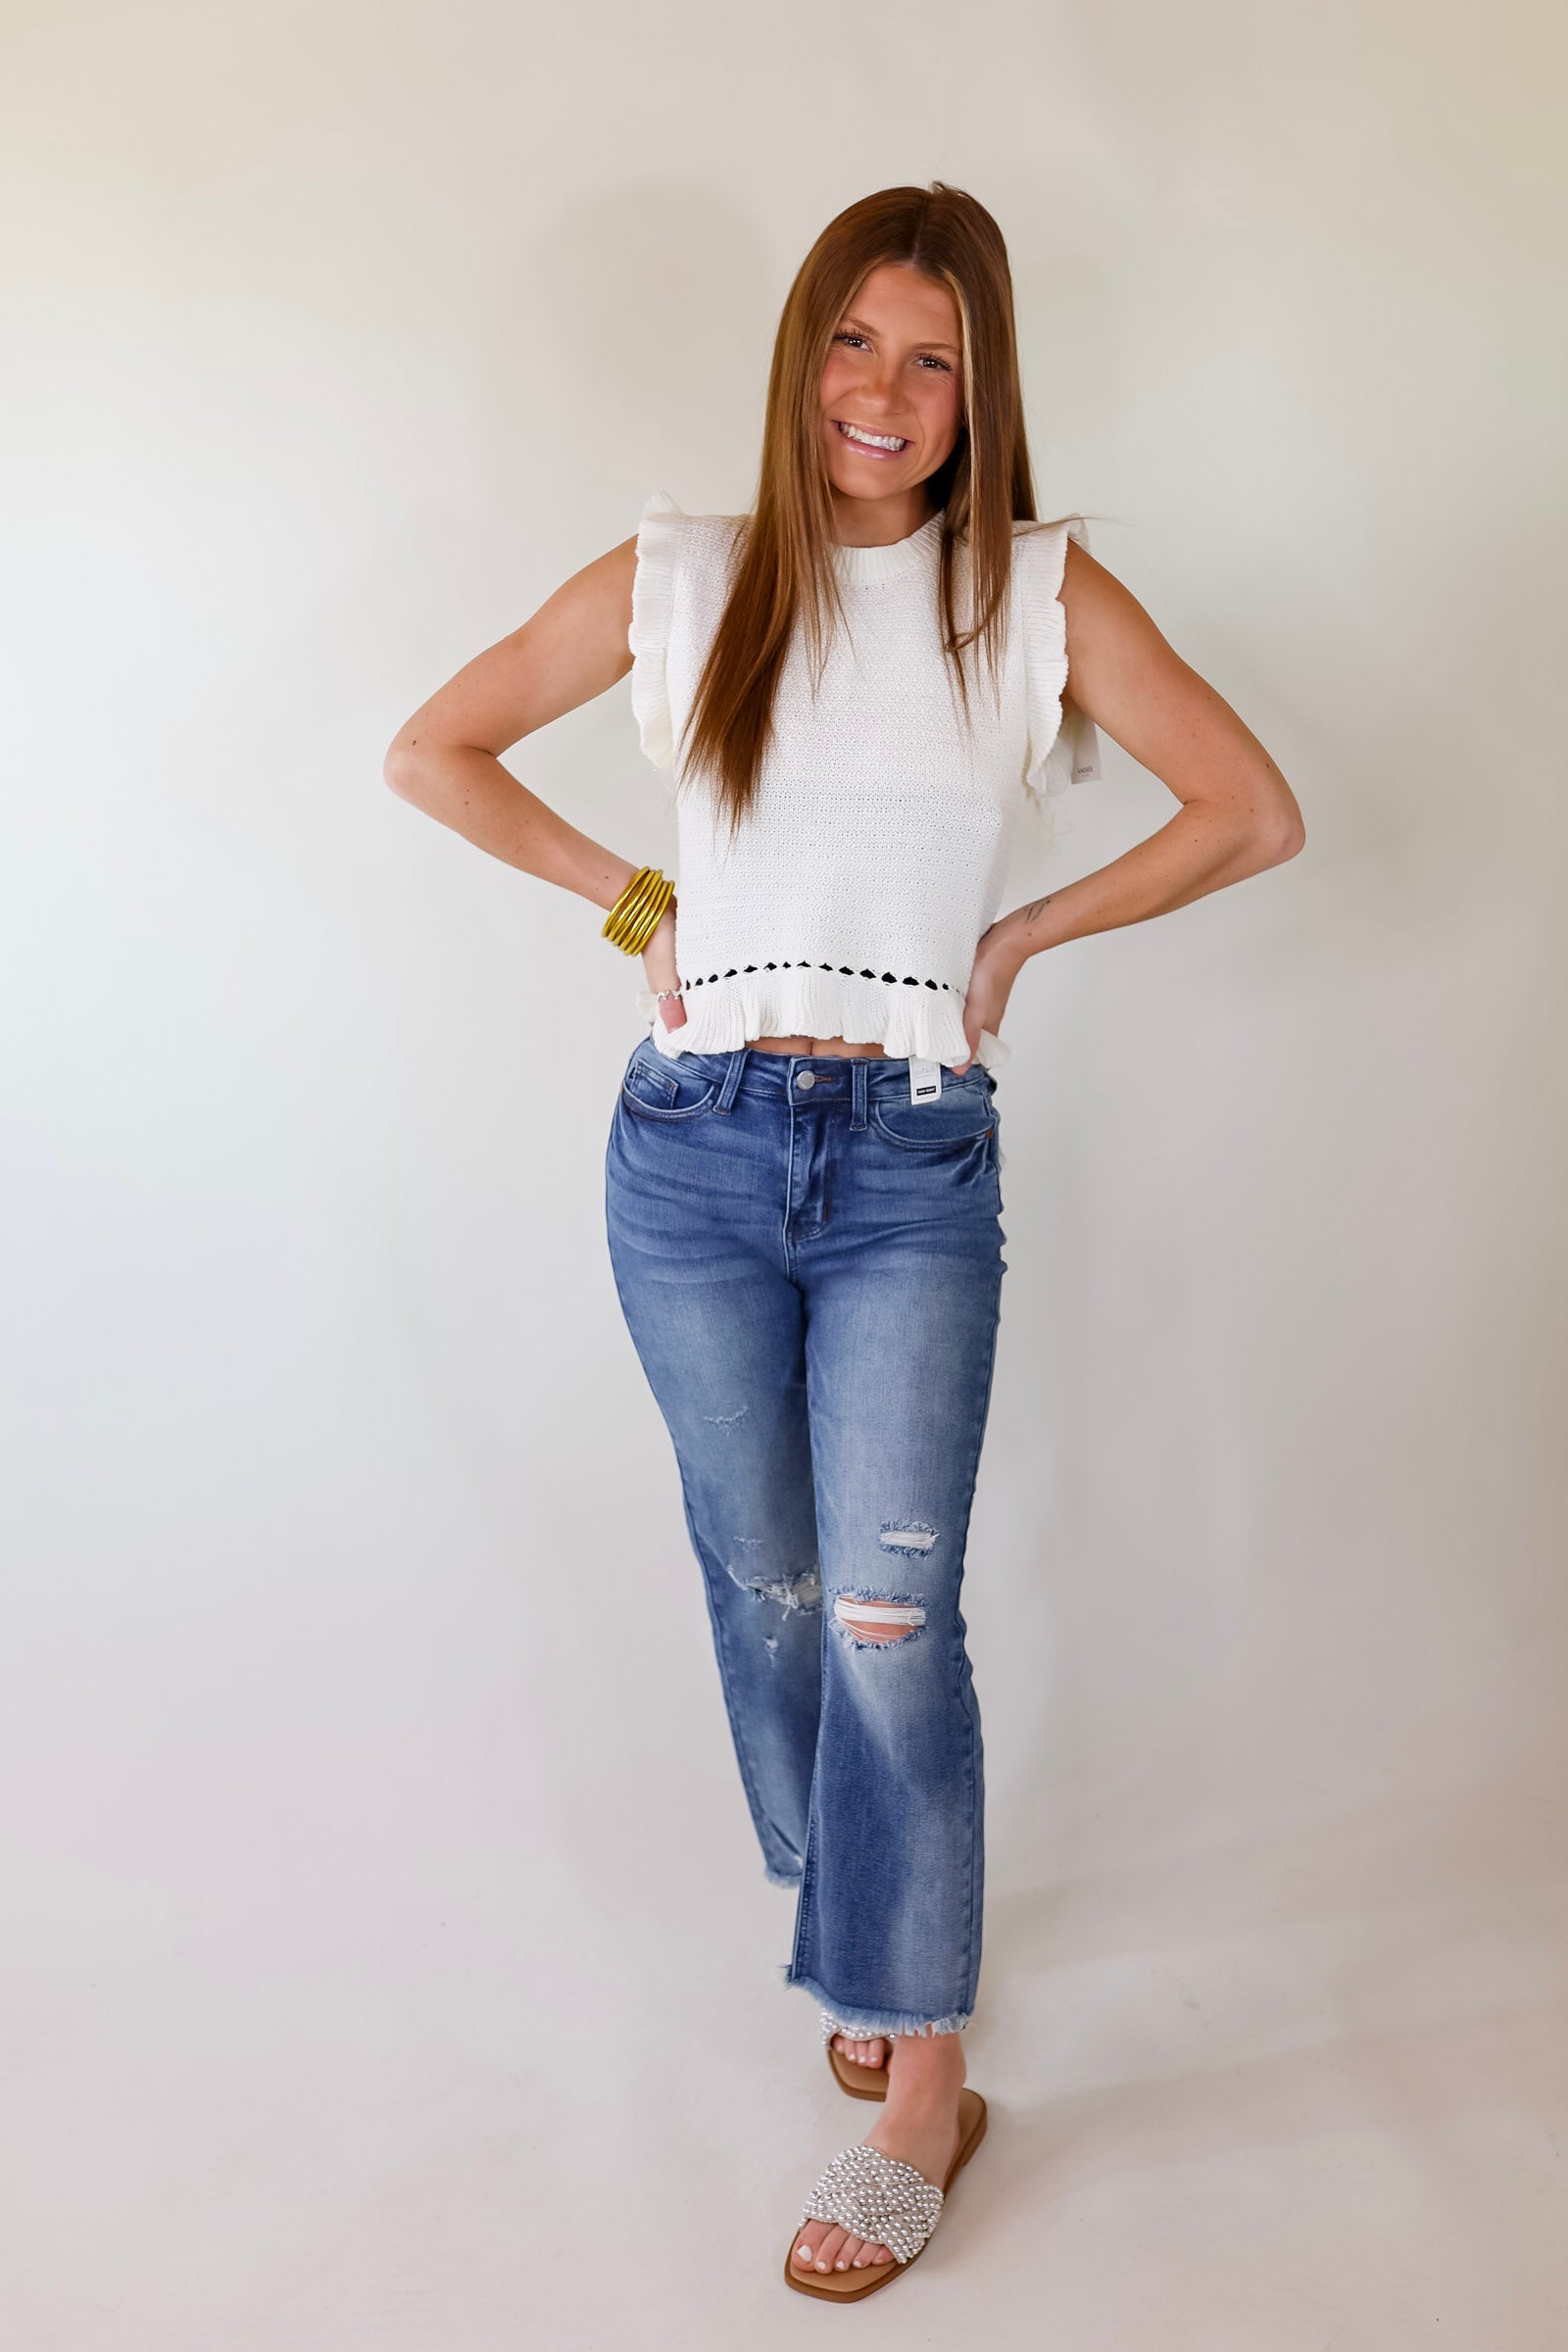 Breezy Baby Cropped Sweater with Ruffle Cap Sleeves in Ivory - Giddy Up Glamour Boutique